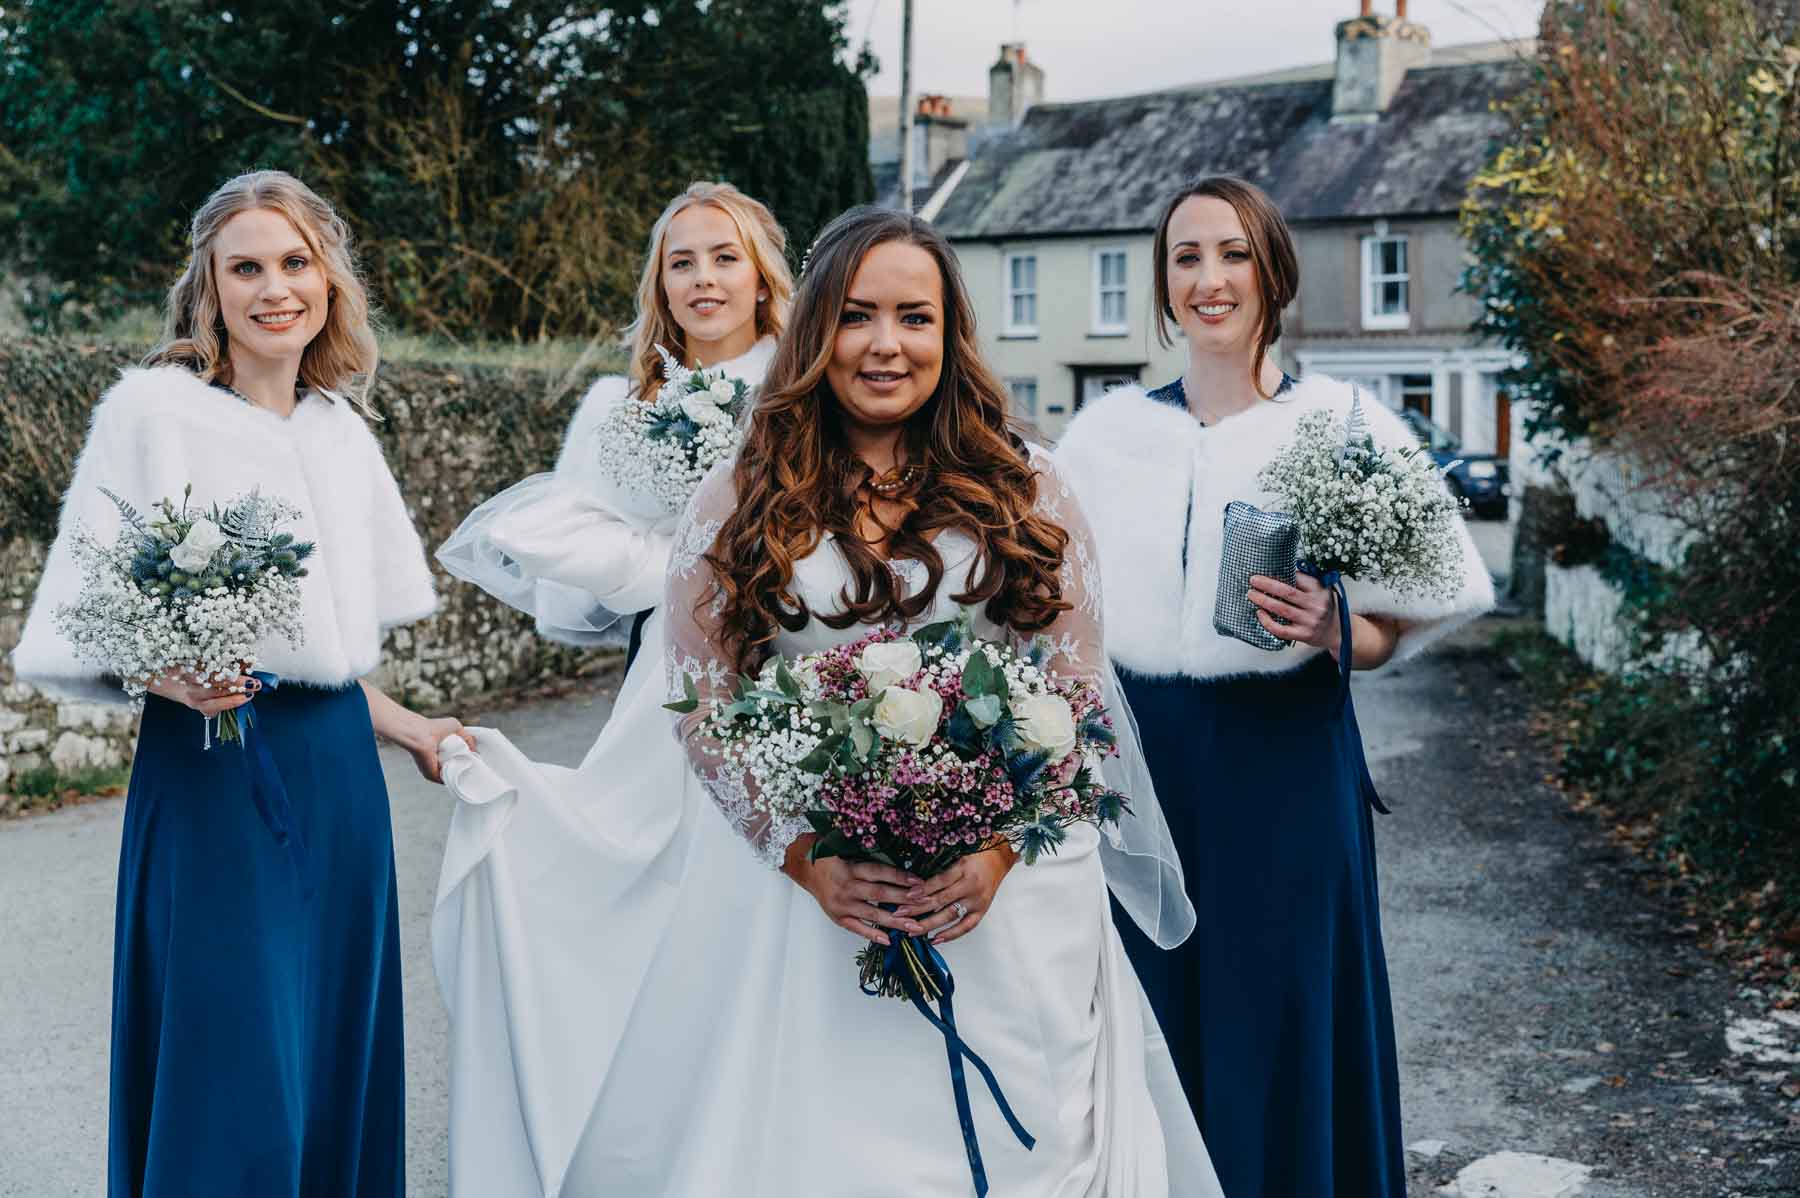 Natural wedding photography Wales - the bride with her bridesmaids